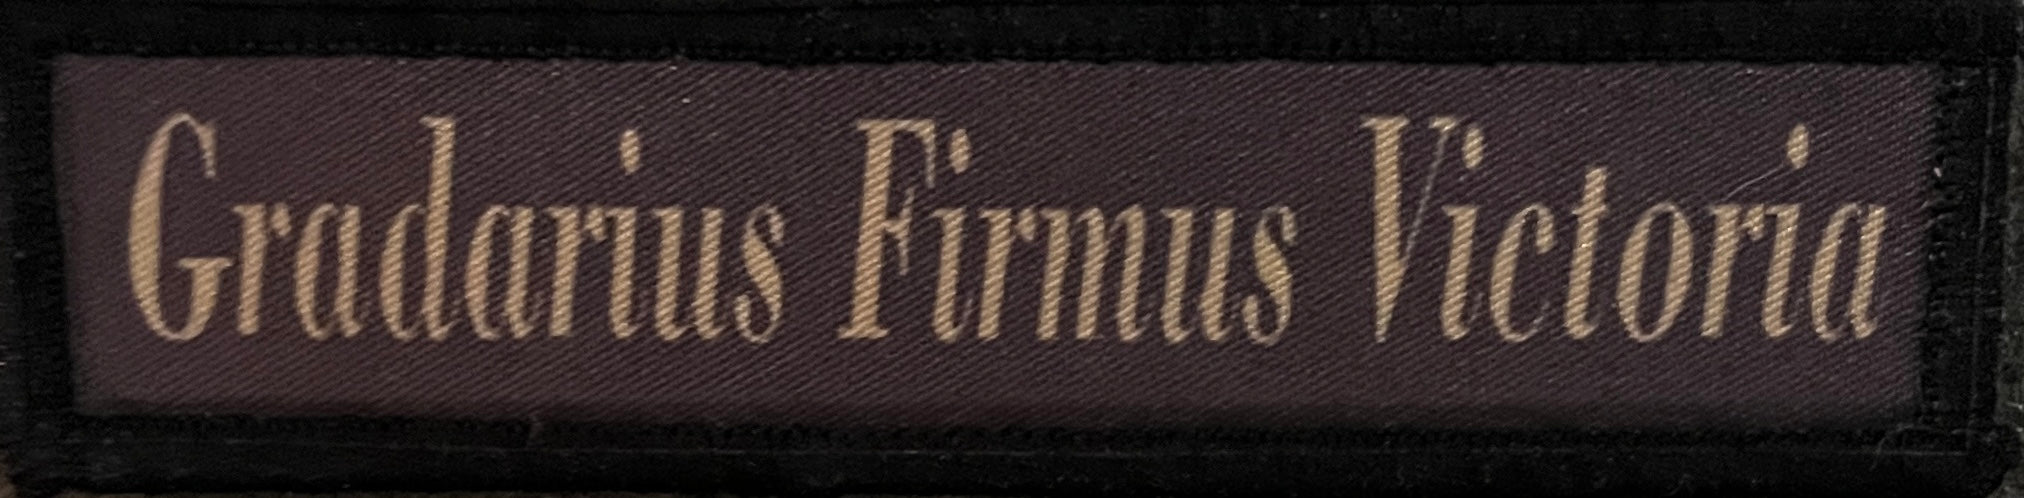 1x4 Gradarius Firmus Victoria Ted Lasso Velcro Morale Patch Morale Patches Redheaded T Shirts 